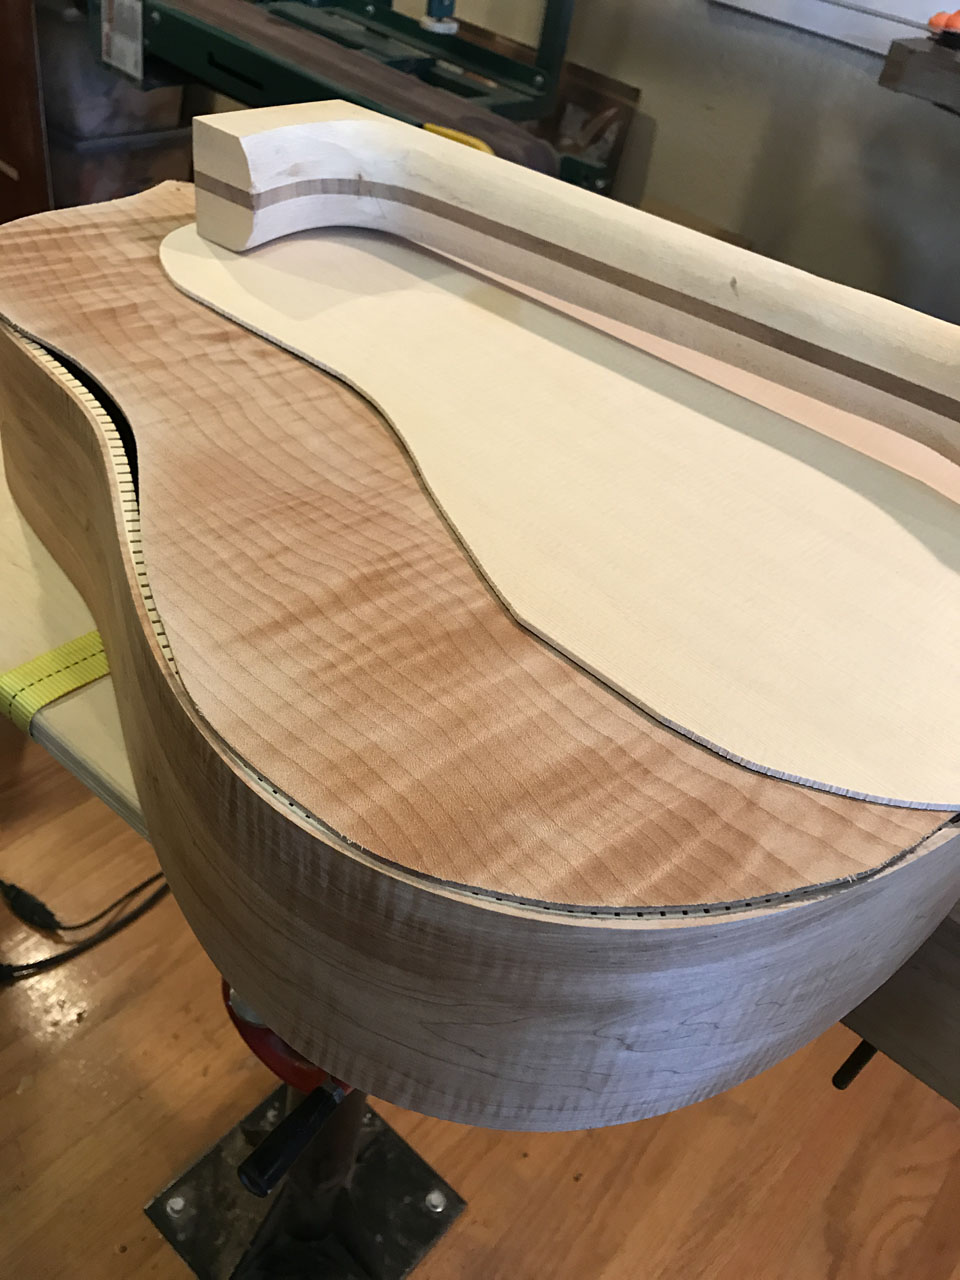 THE MAKINGS OF A 730L DREADNOUGHT. A BODY "HOOP", ROUGH-CUT TOP AND BACK, AND A ROUGH-CUT AND ONLY PARTIALLY-SHAPED NECK BLANK.